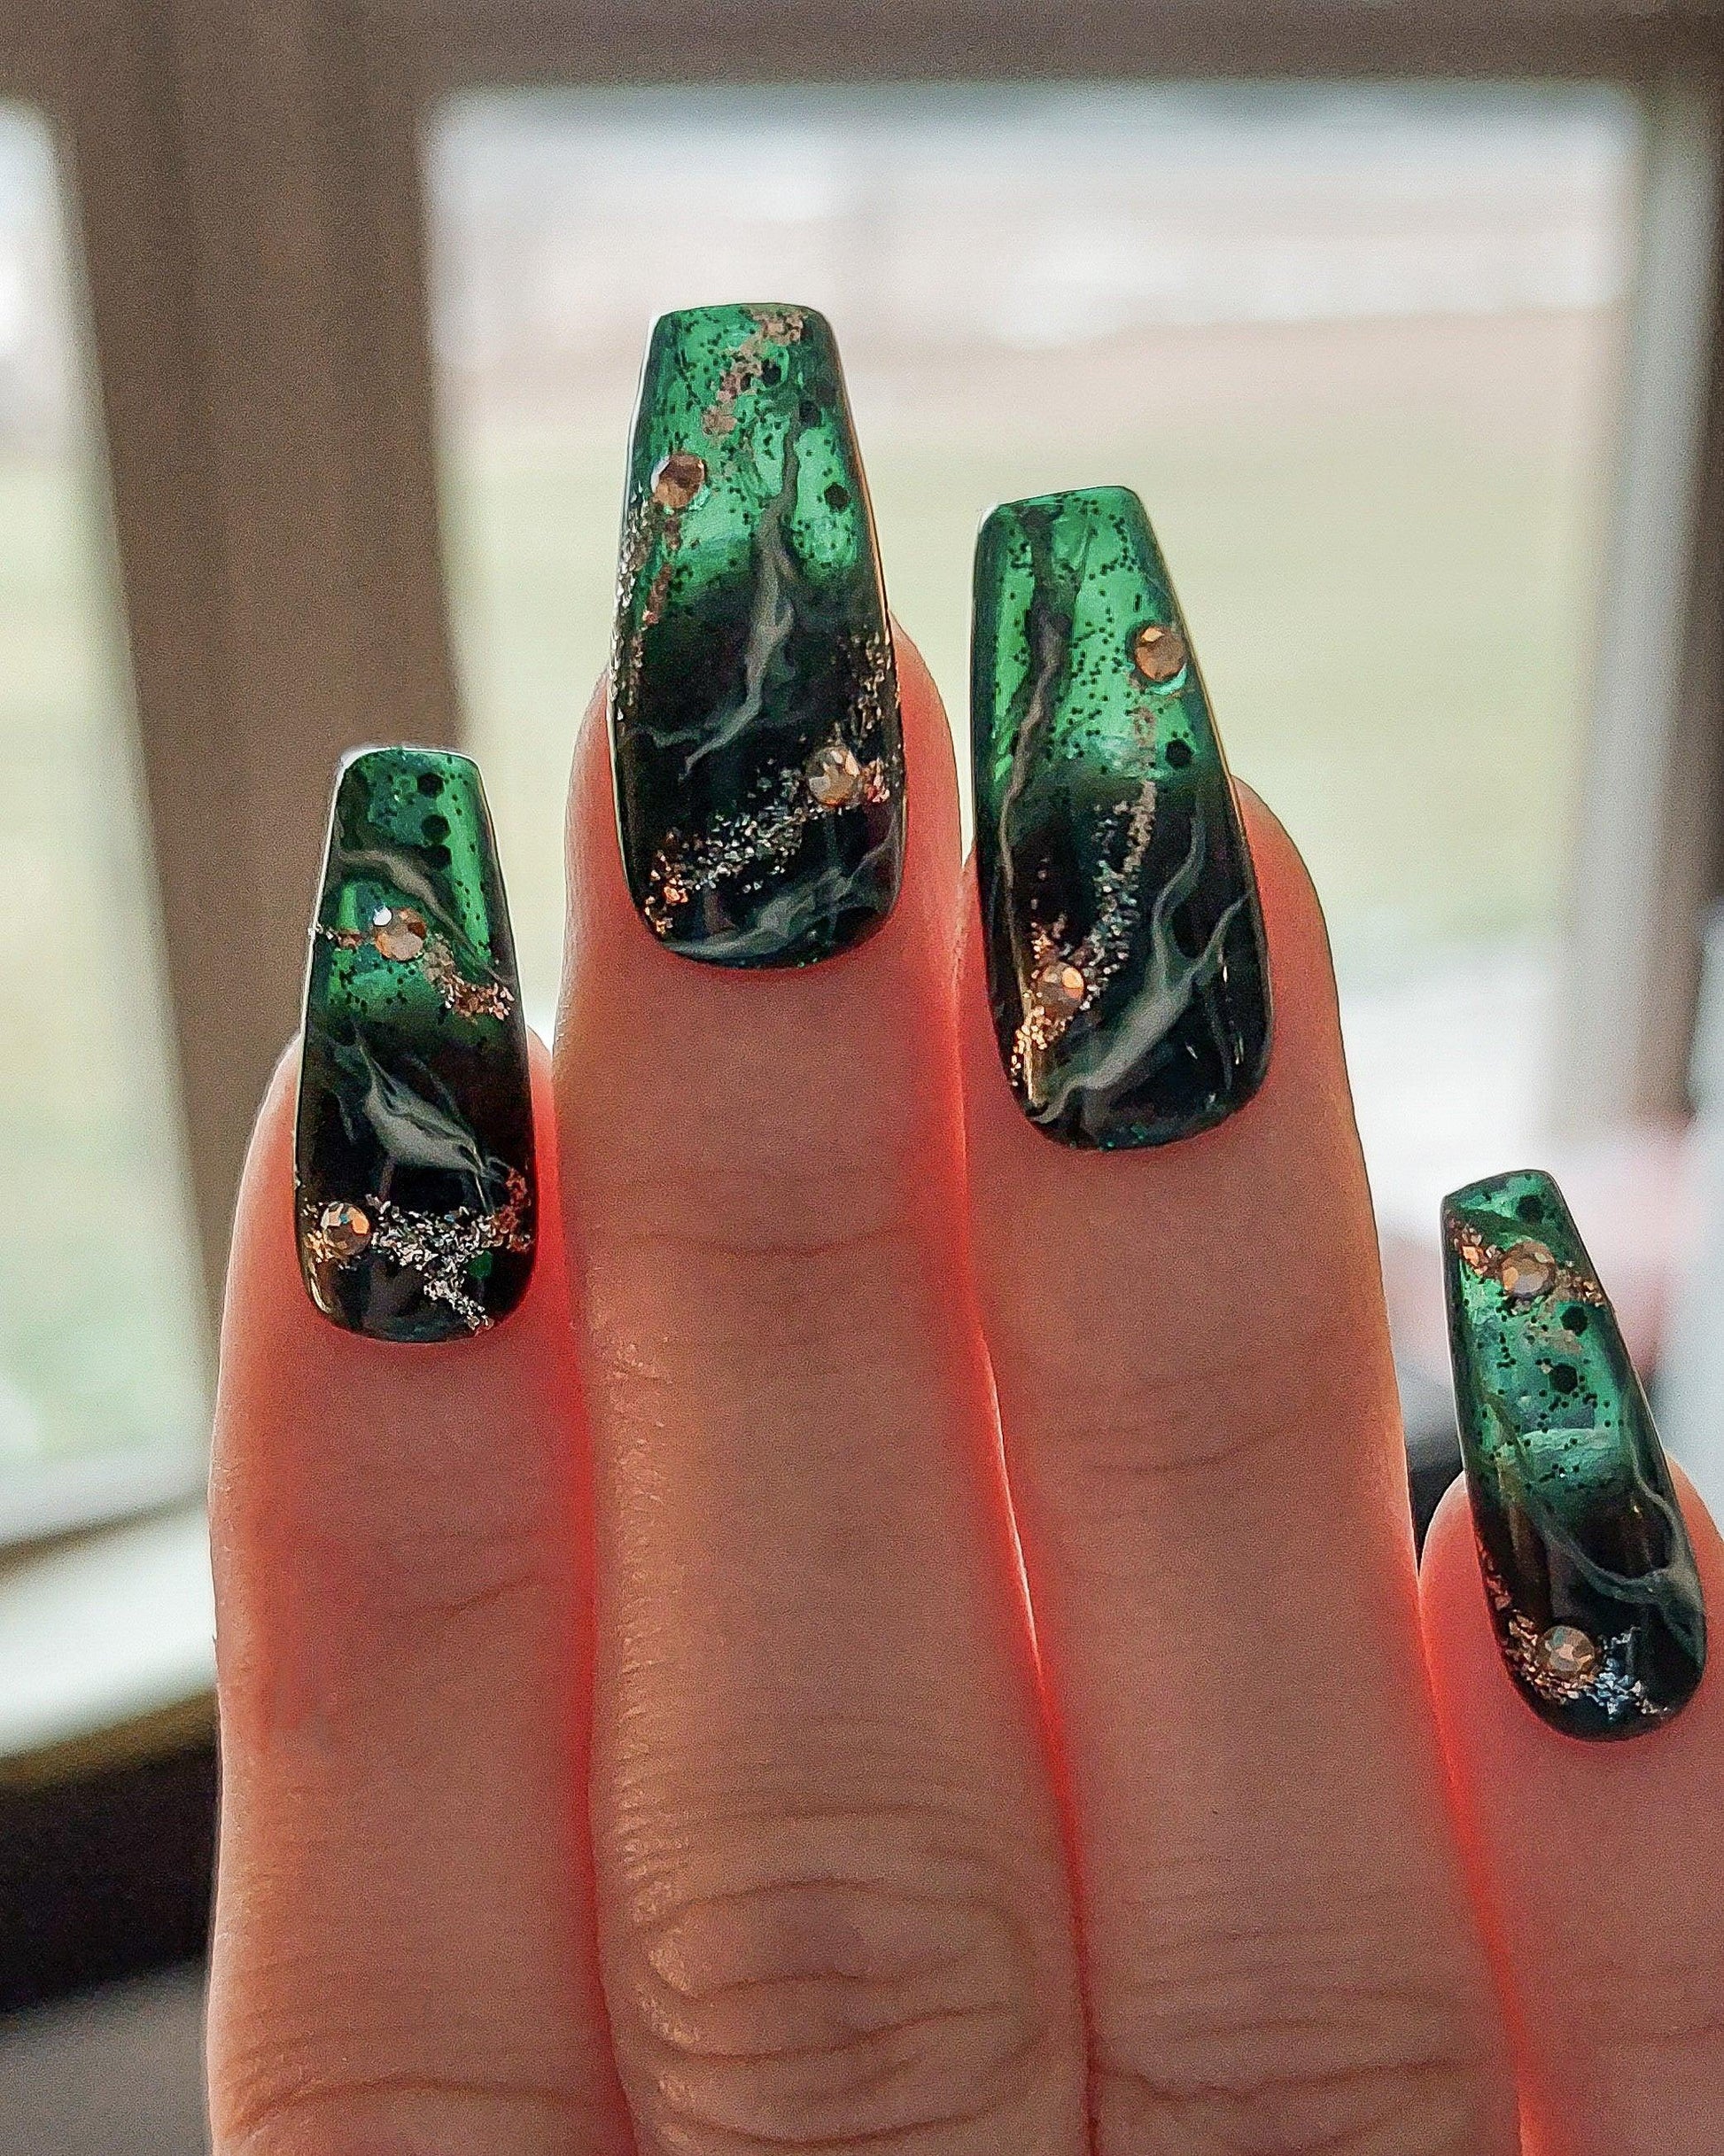 Emerald Green Marble Press on Nails  FancyB Handmade Nails – FancyB Press  on Nails